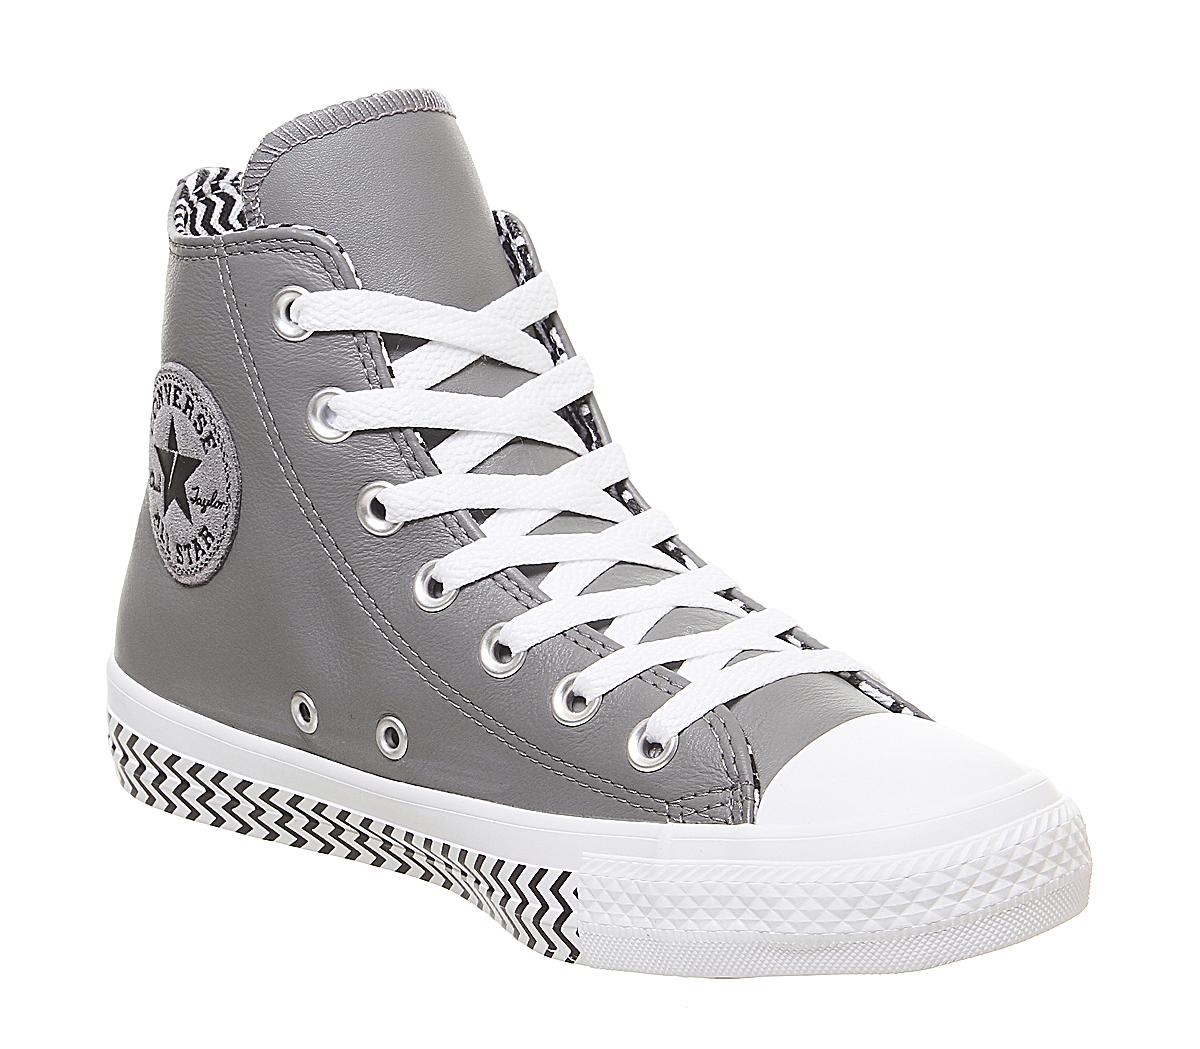 grey leather converse all star